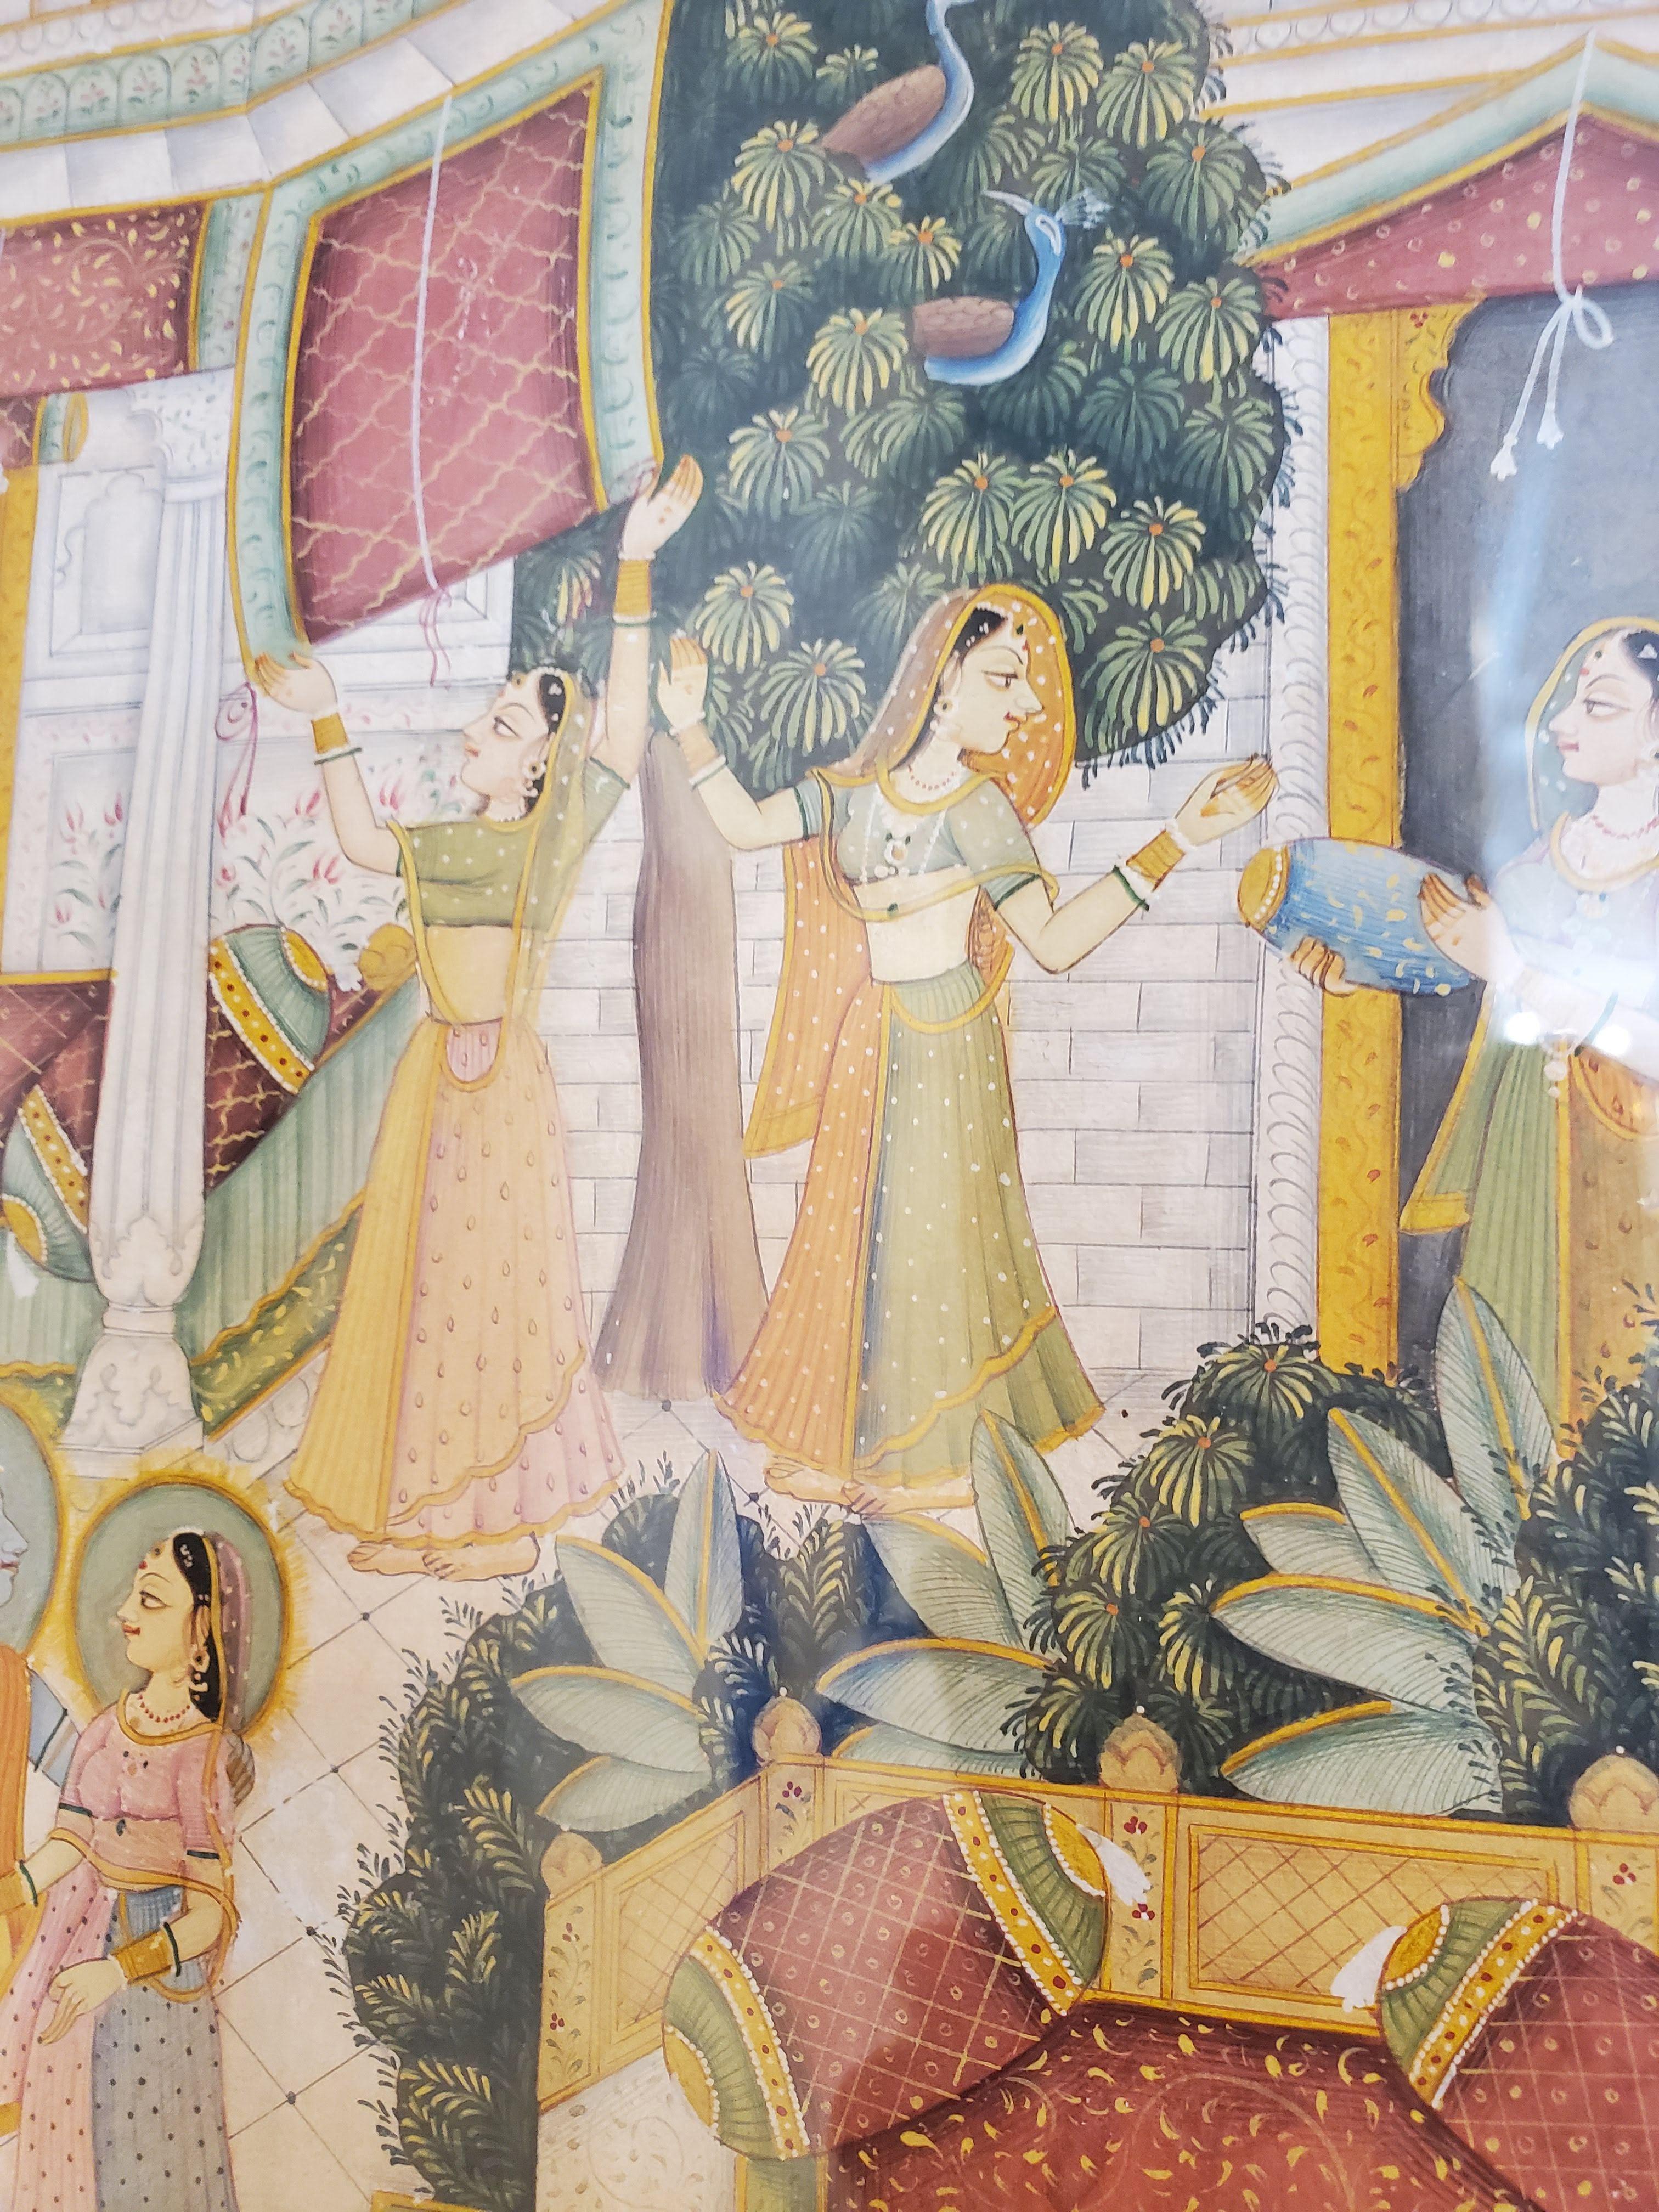 Finely executed 18th century Indian Court painting. Gouache heightened with gold on paper. Krishna with Radha and other Gopis in a palace setting. Exquisite detail. Framed in complimenting dark tan linen mat and gold gilt frame.
Rajasthan, India,